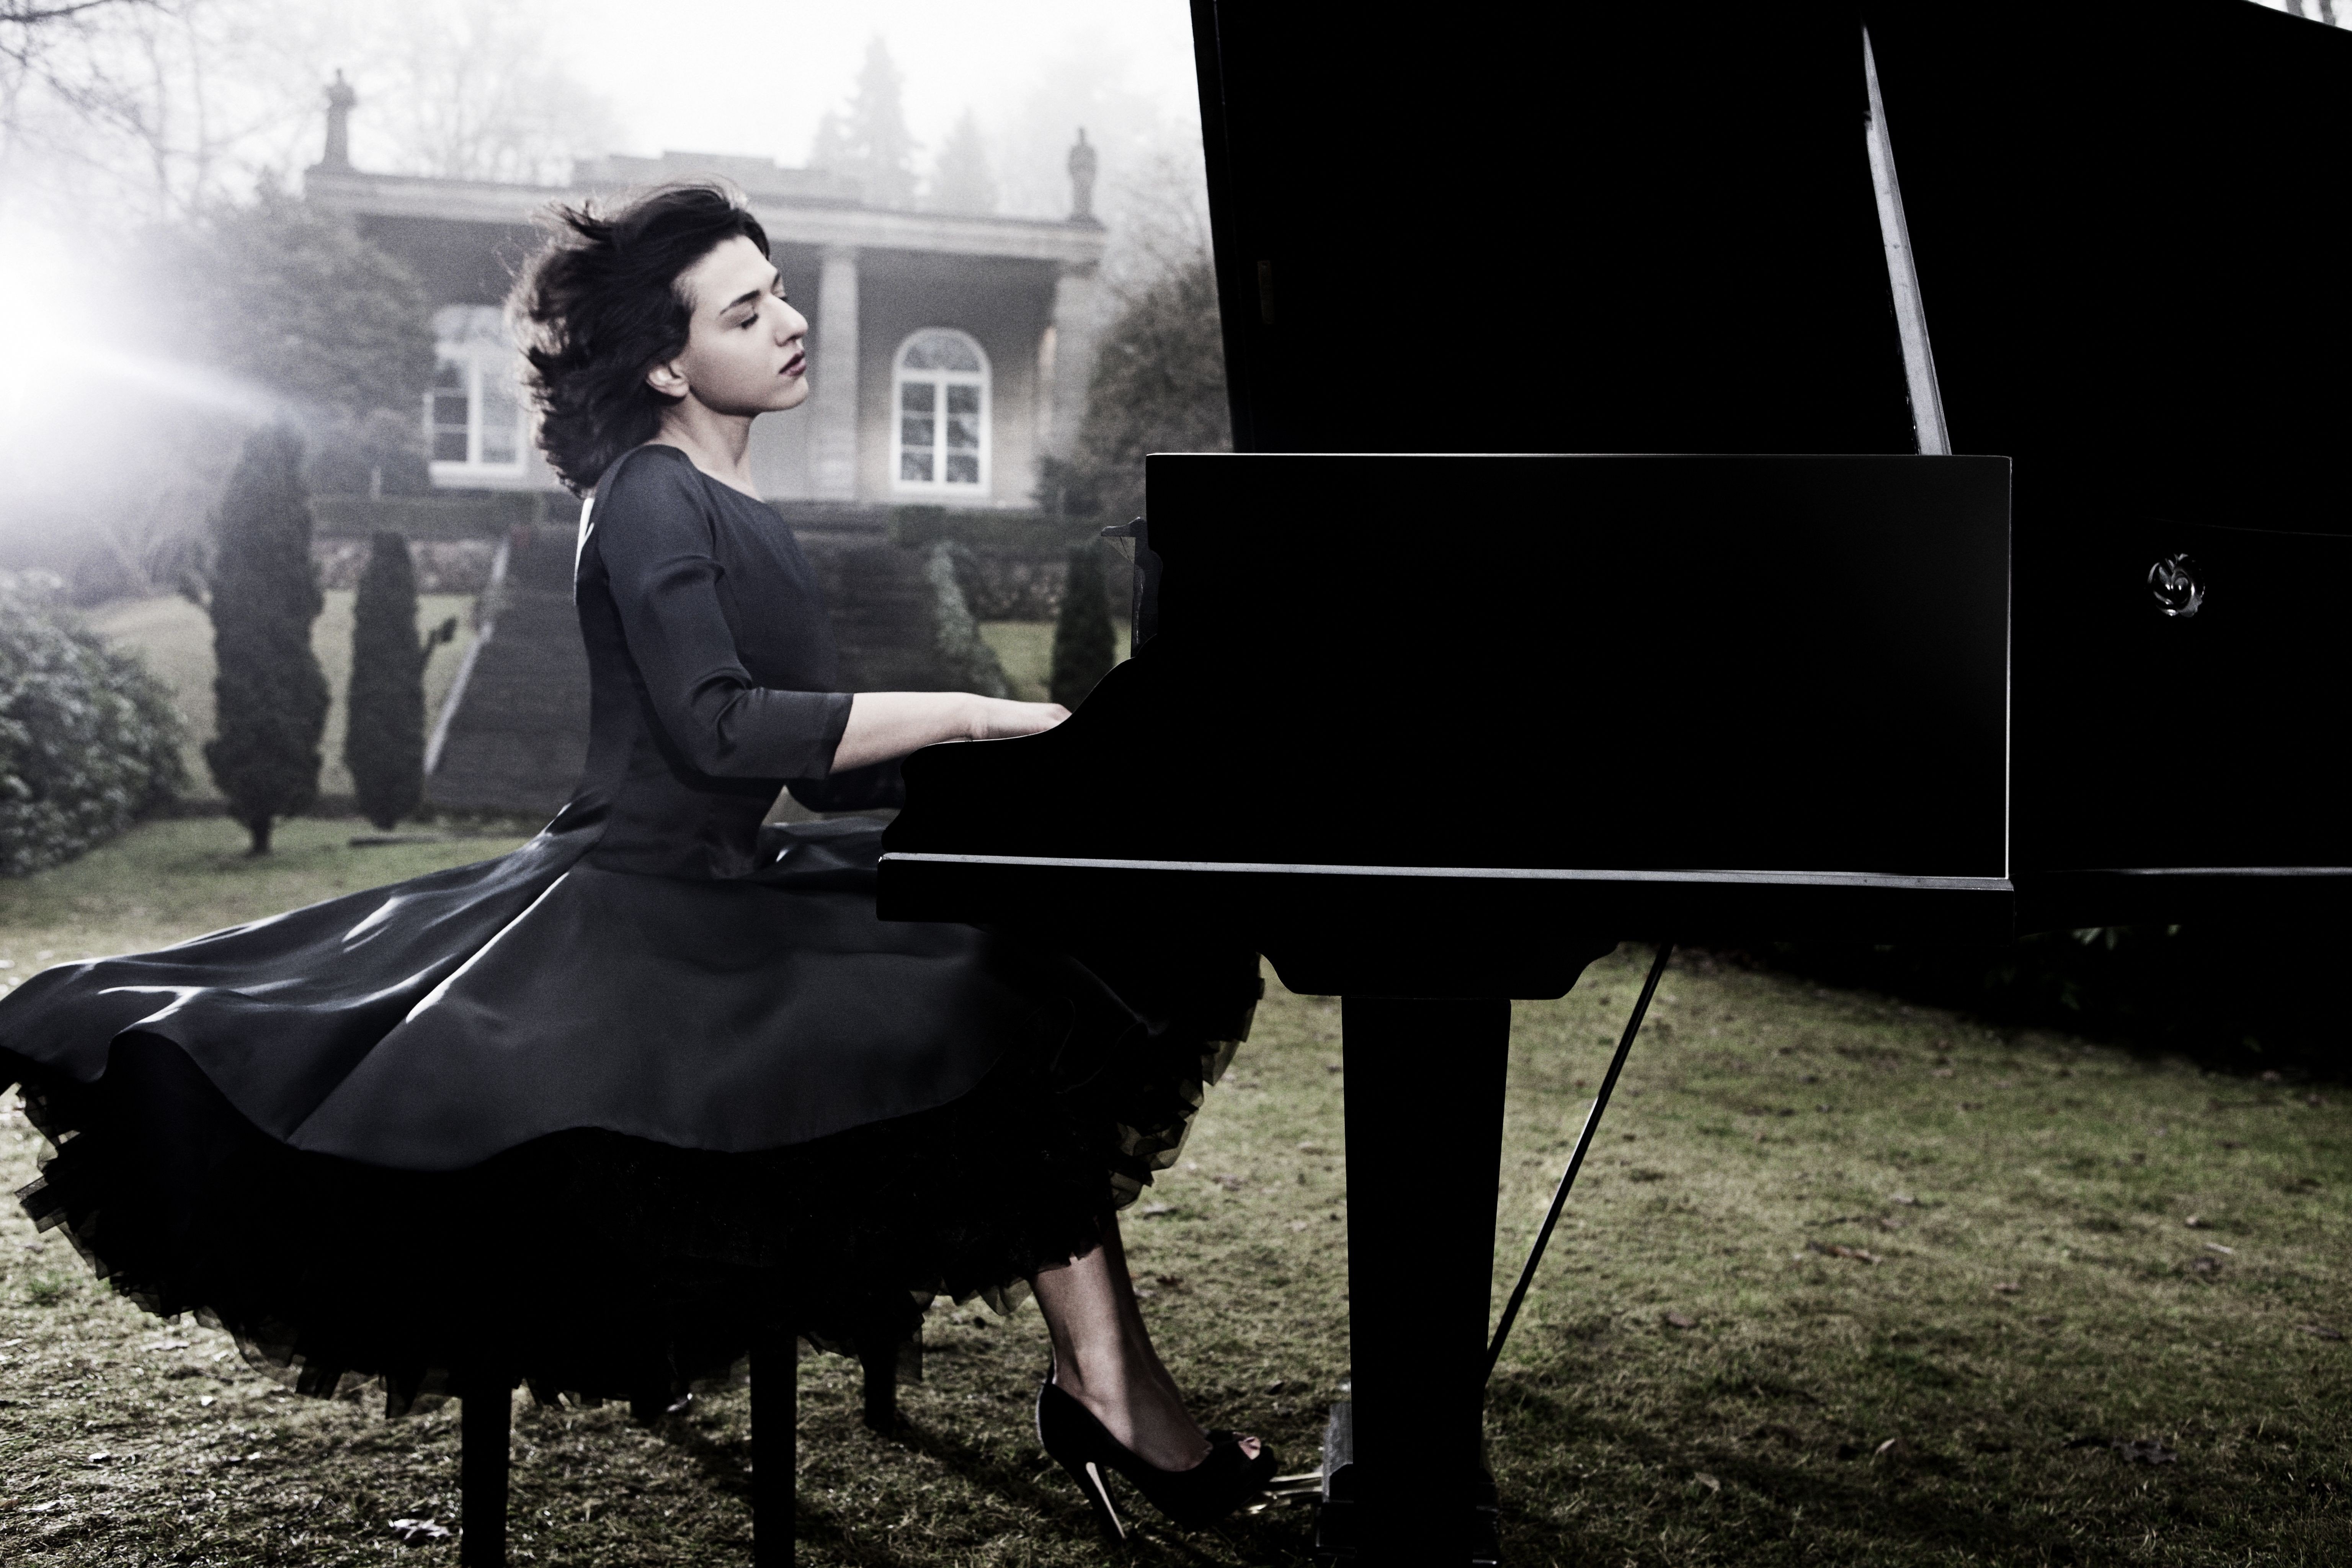 French-Georgian pianist Khatia Buniatishvili will return to Hong Kong next month at the invitation of Hong Kong Philharmonic Orchestra to play Mozart’s Piano Concerto No 20. She last performed in the city in 2016.